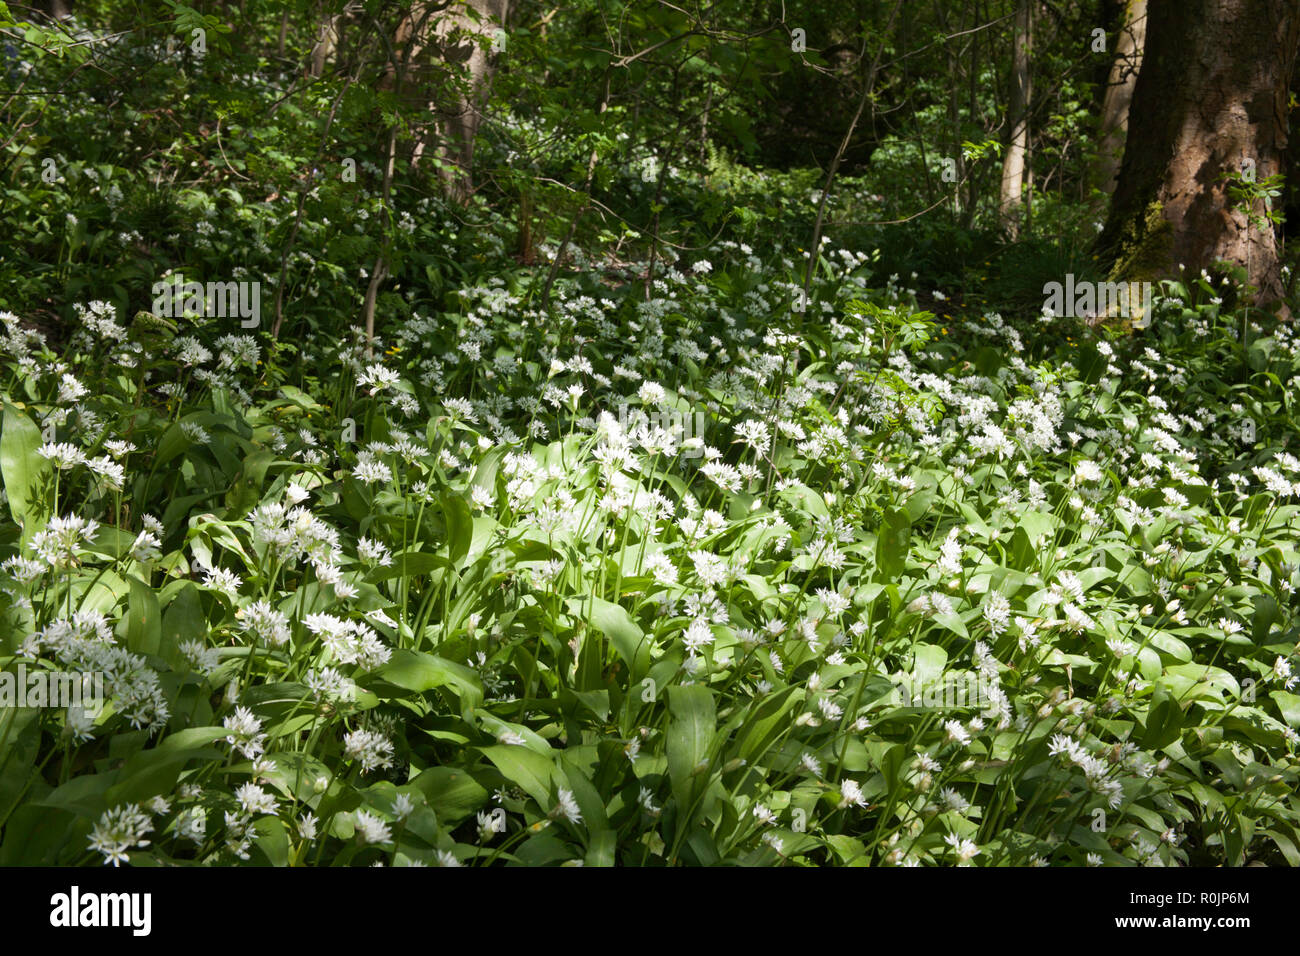 Ramsons or wild garlic  in flower Etherow Country Park n Spring near Marple Cheshire England Stock Photo